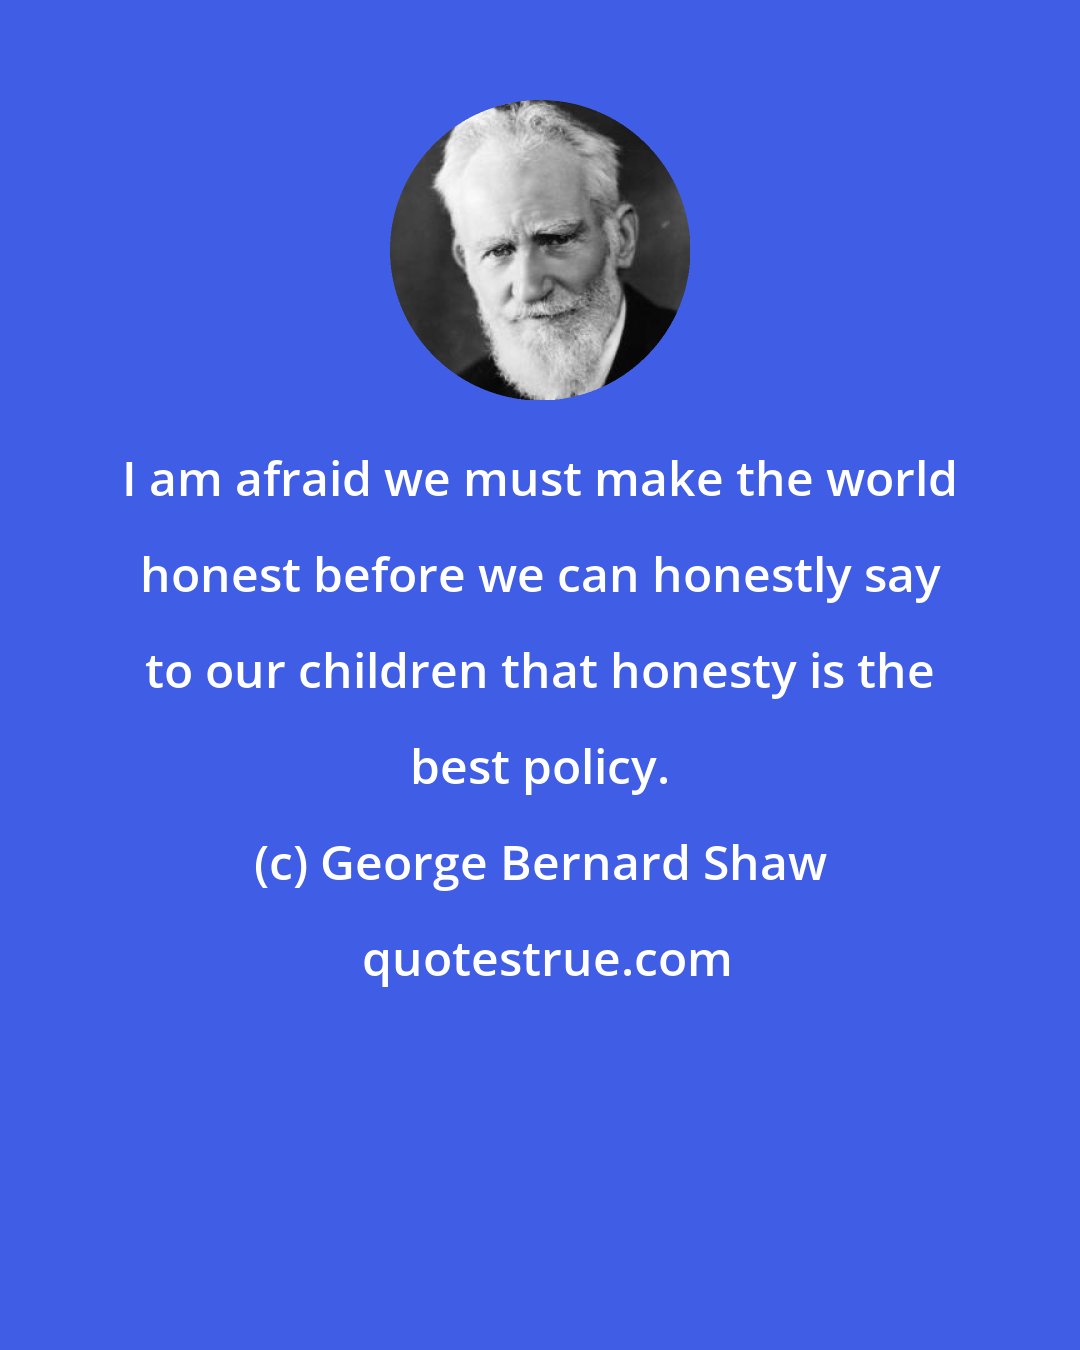 George Bernard Shaw: I am afraid we must make the world honest before we can honestly say to our children that honesty is the best policy.